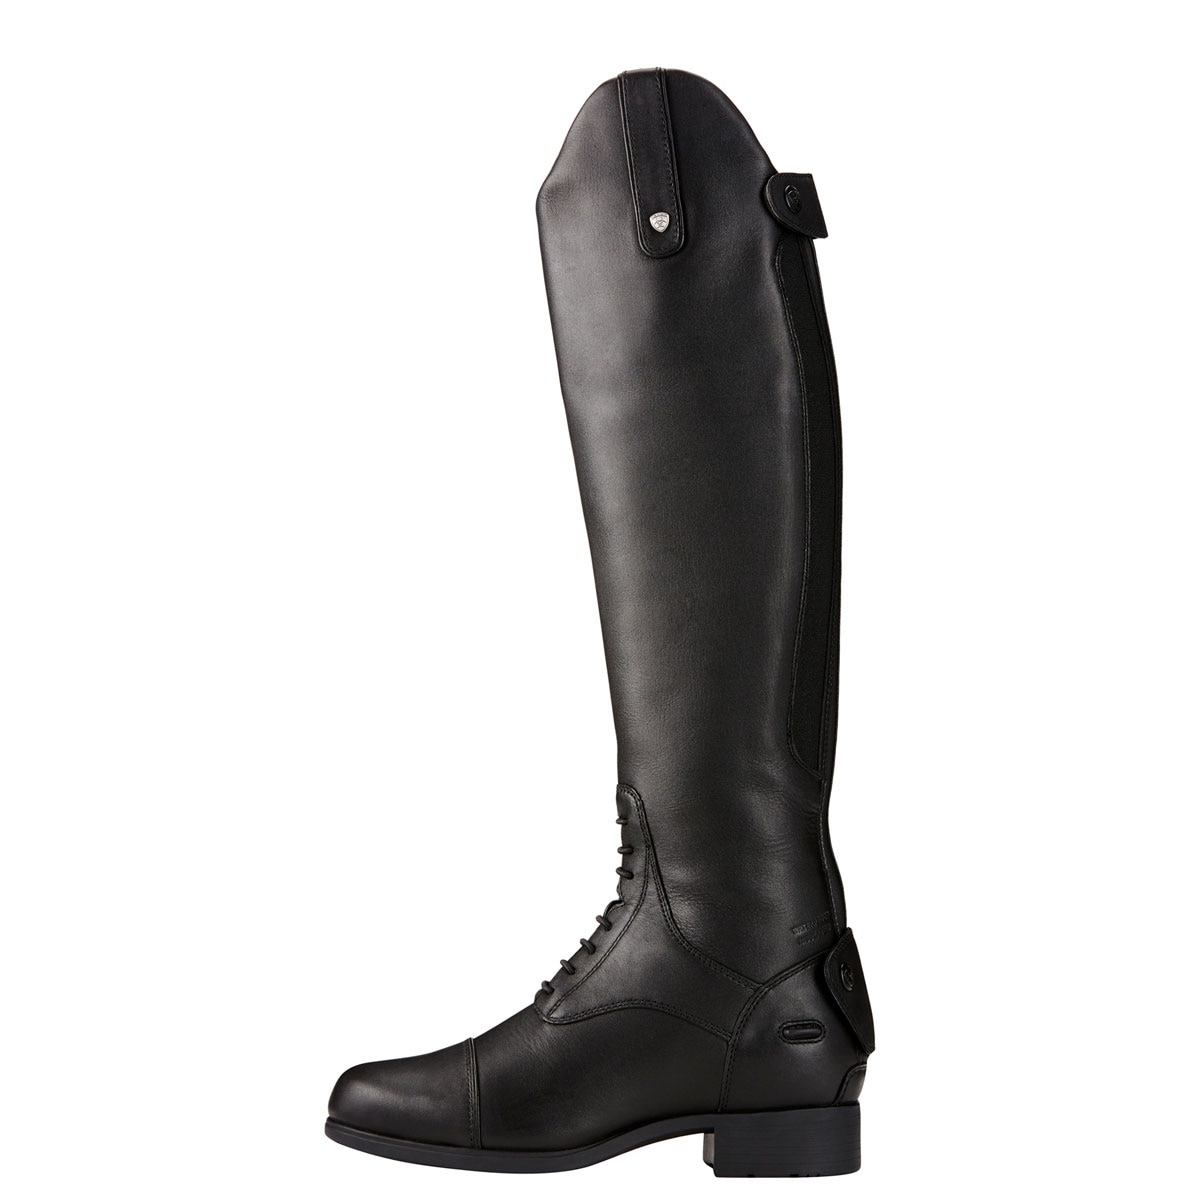 Ariat Bromont Pro Tall H2O Insulated Boot